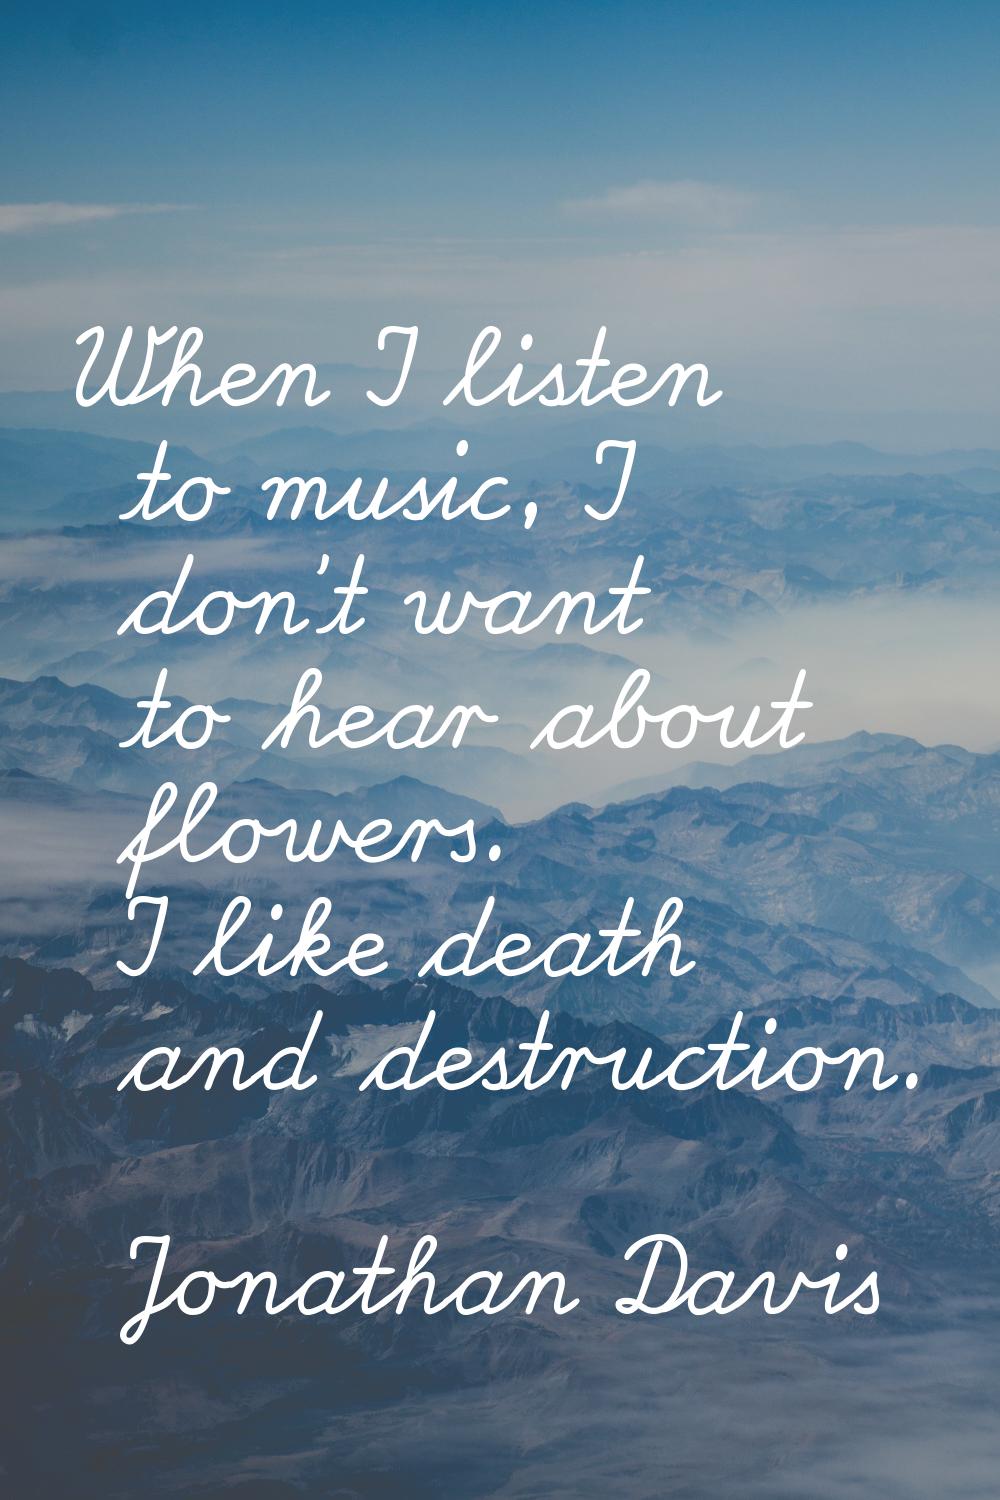 When I listen to music, I don't want to hear about flowers. I like death and destruction.